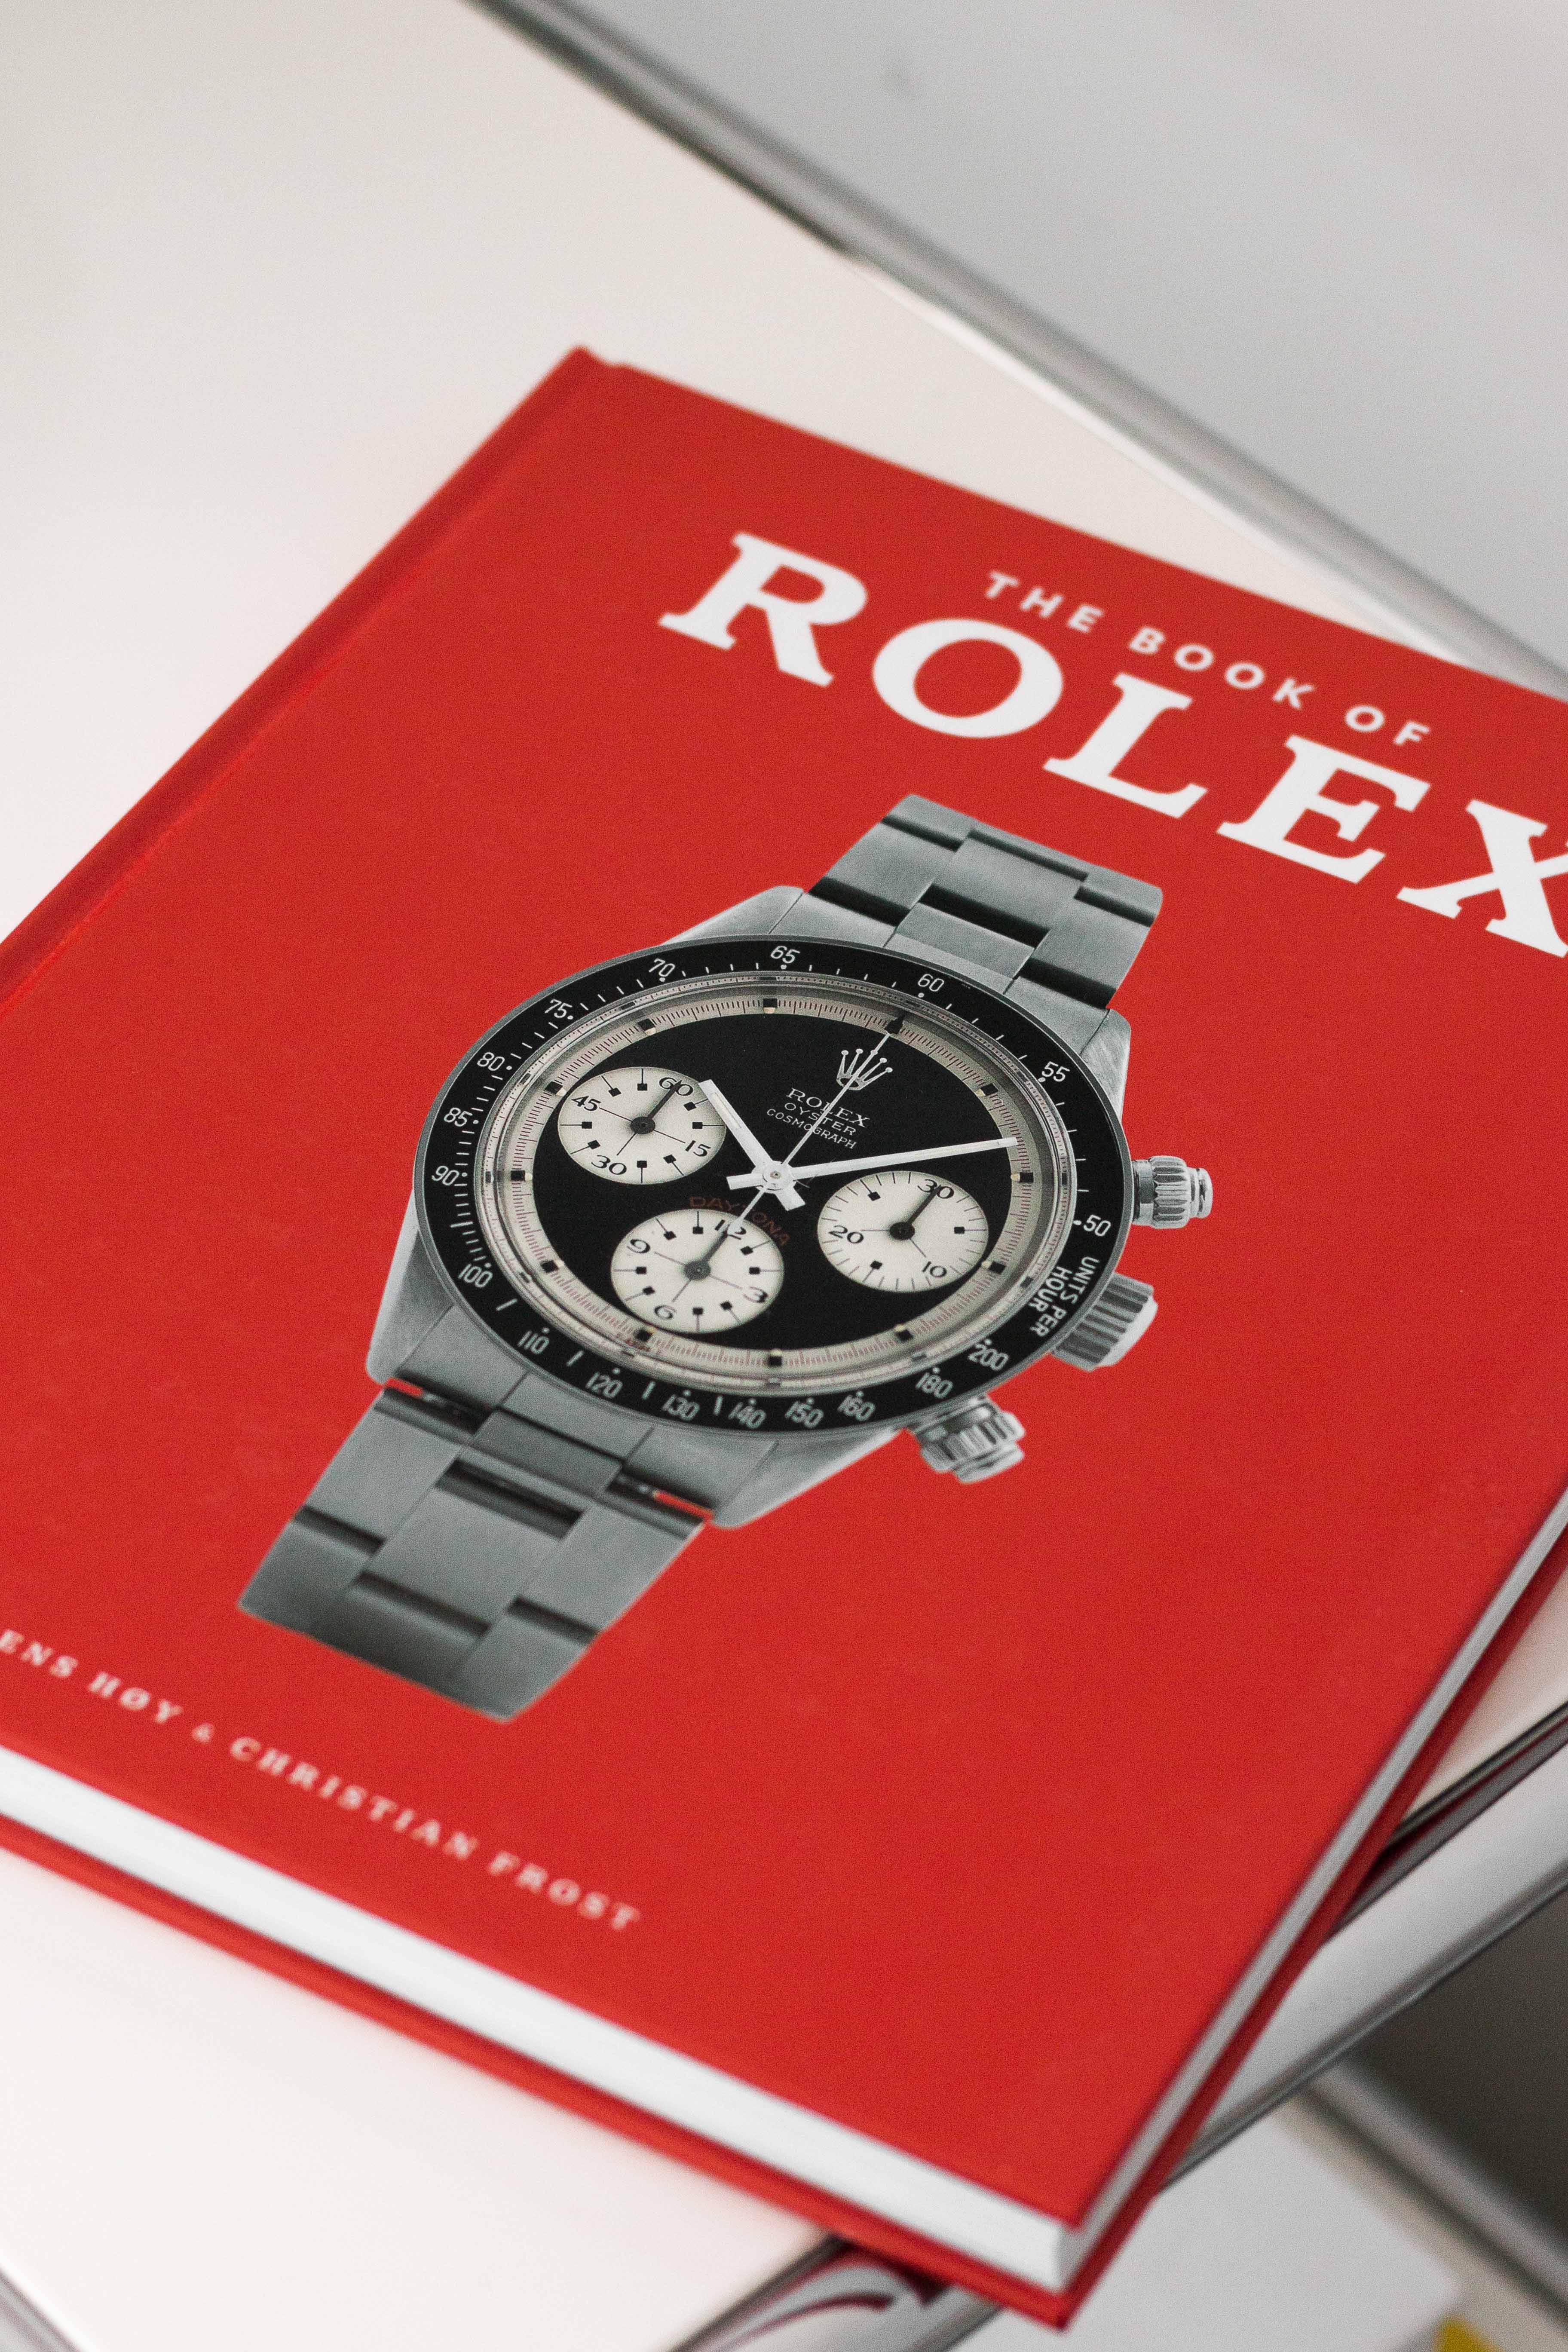 The Book of Rolex by Jens Høy